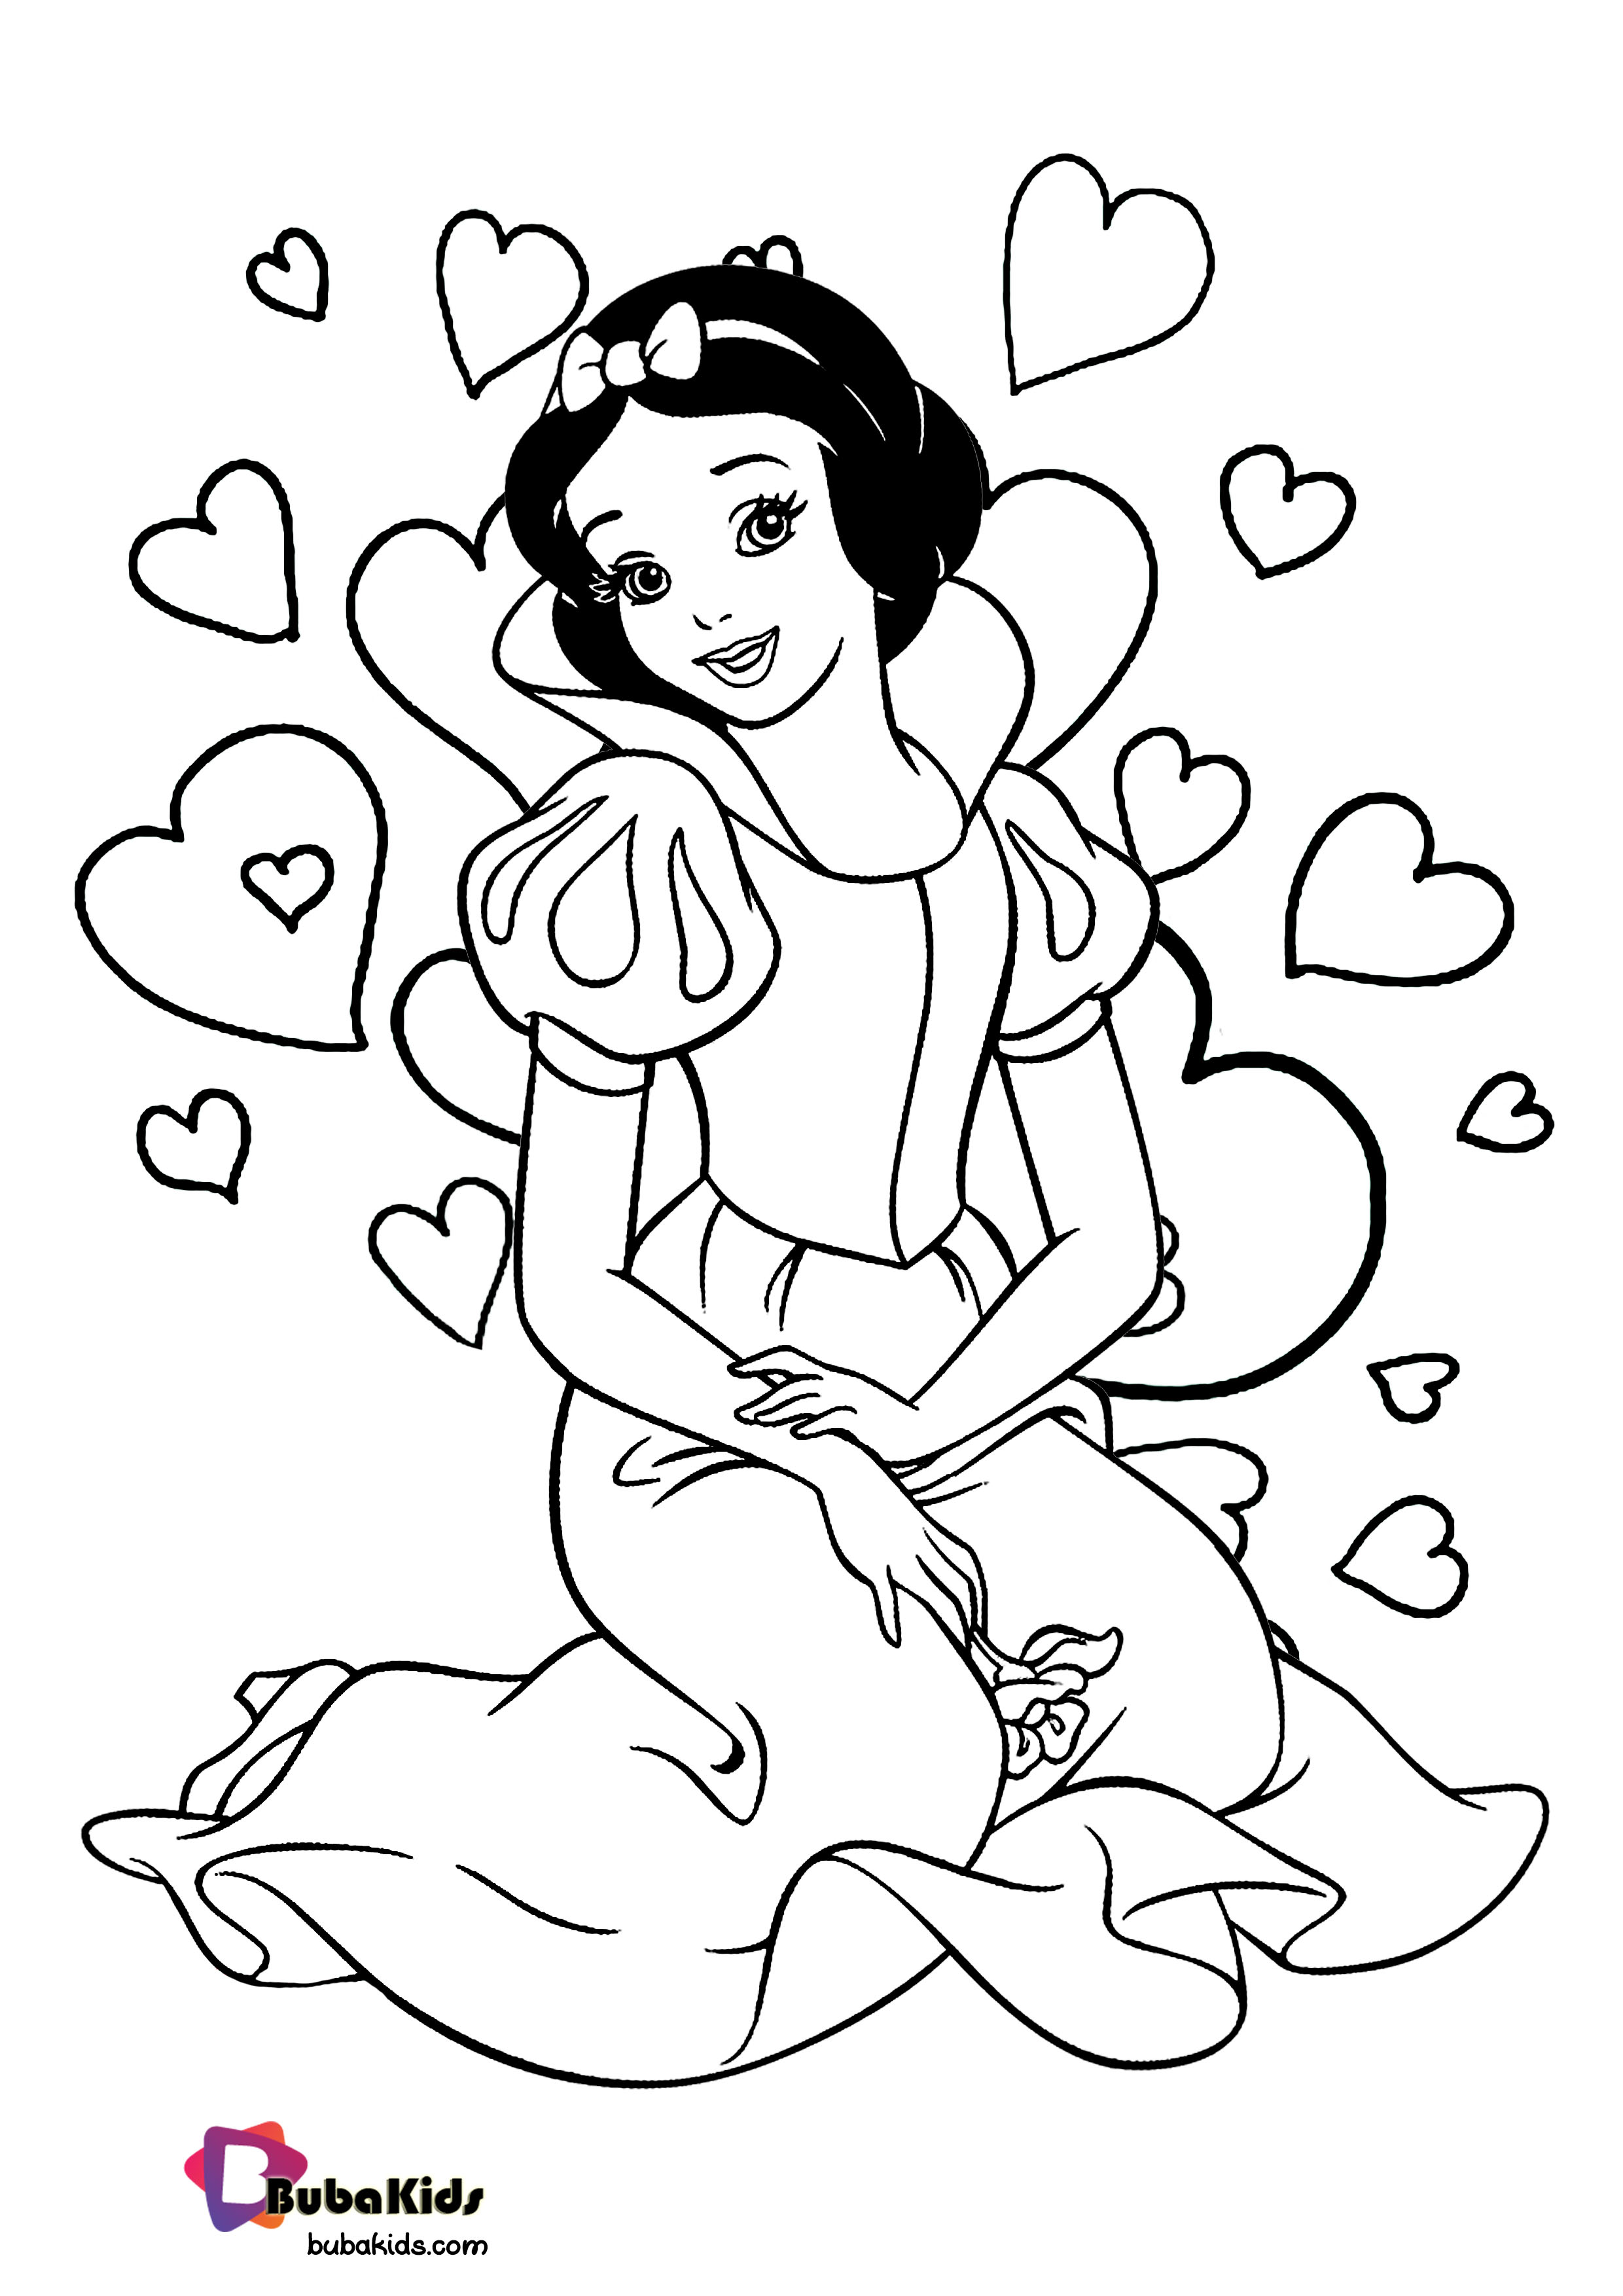 Love Snow White Coloring Page Wallpaper